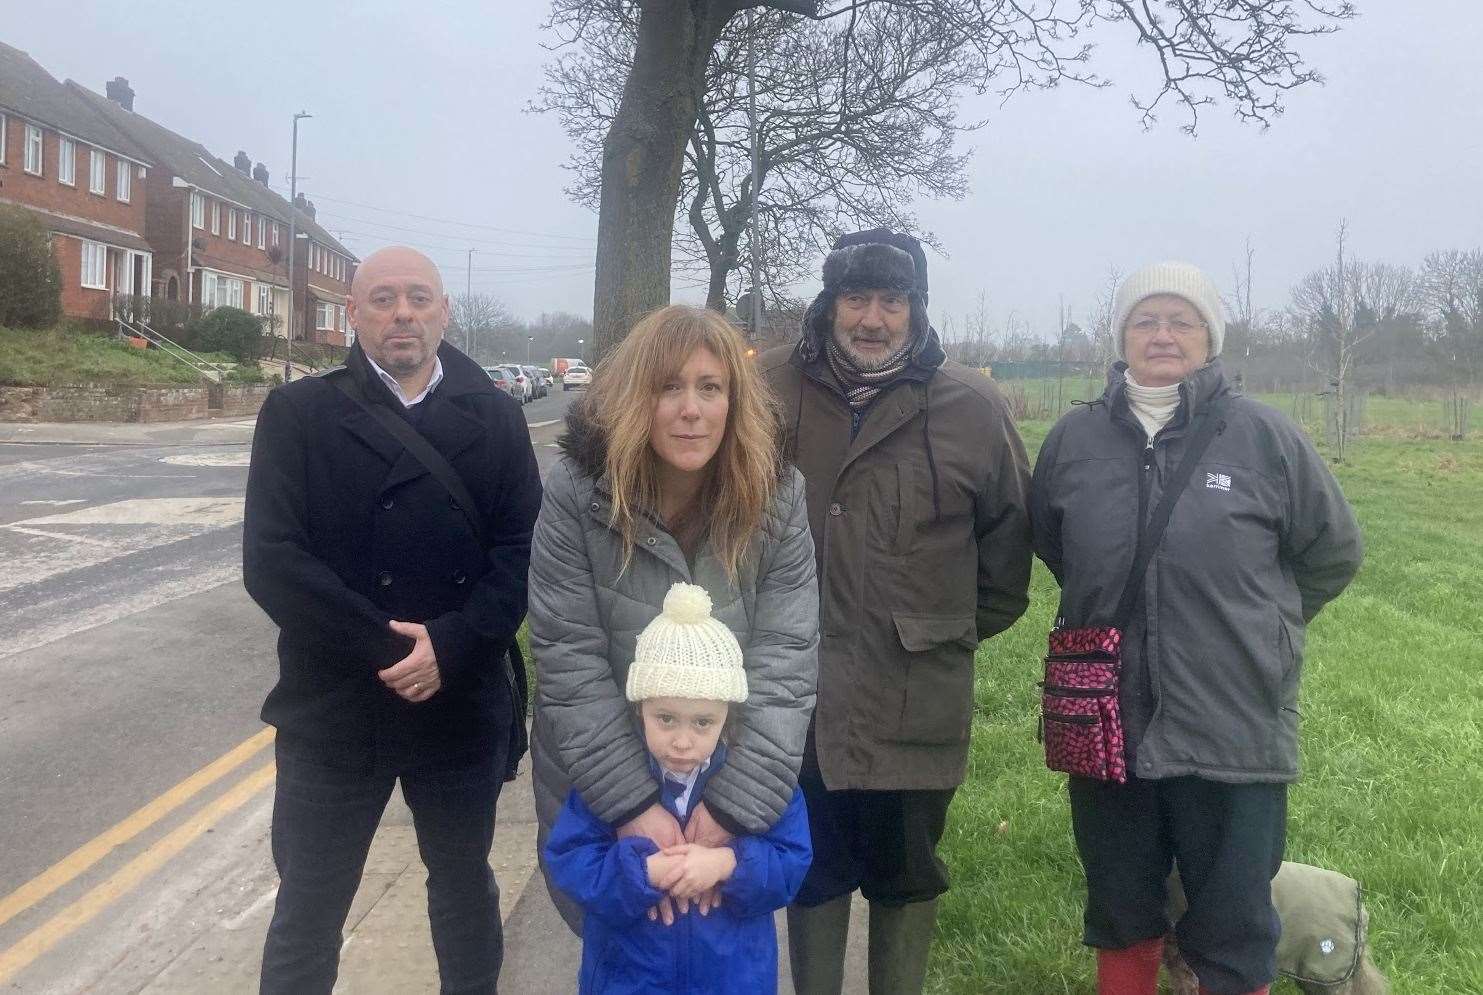 Residents living in Dane Valley Road, Margate, have started a petition calling for a 20mph speed limit on the "dangerous" road